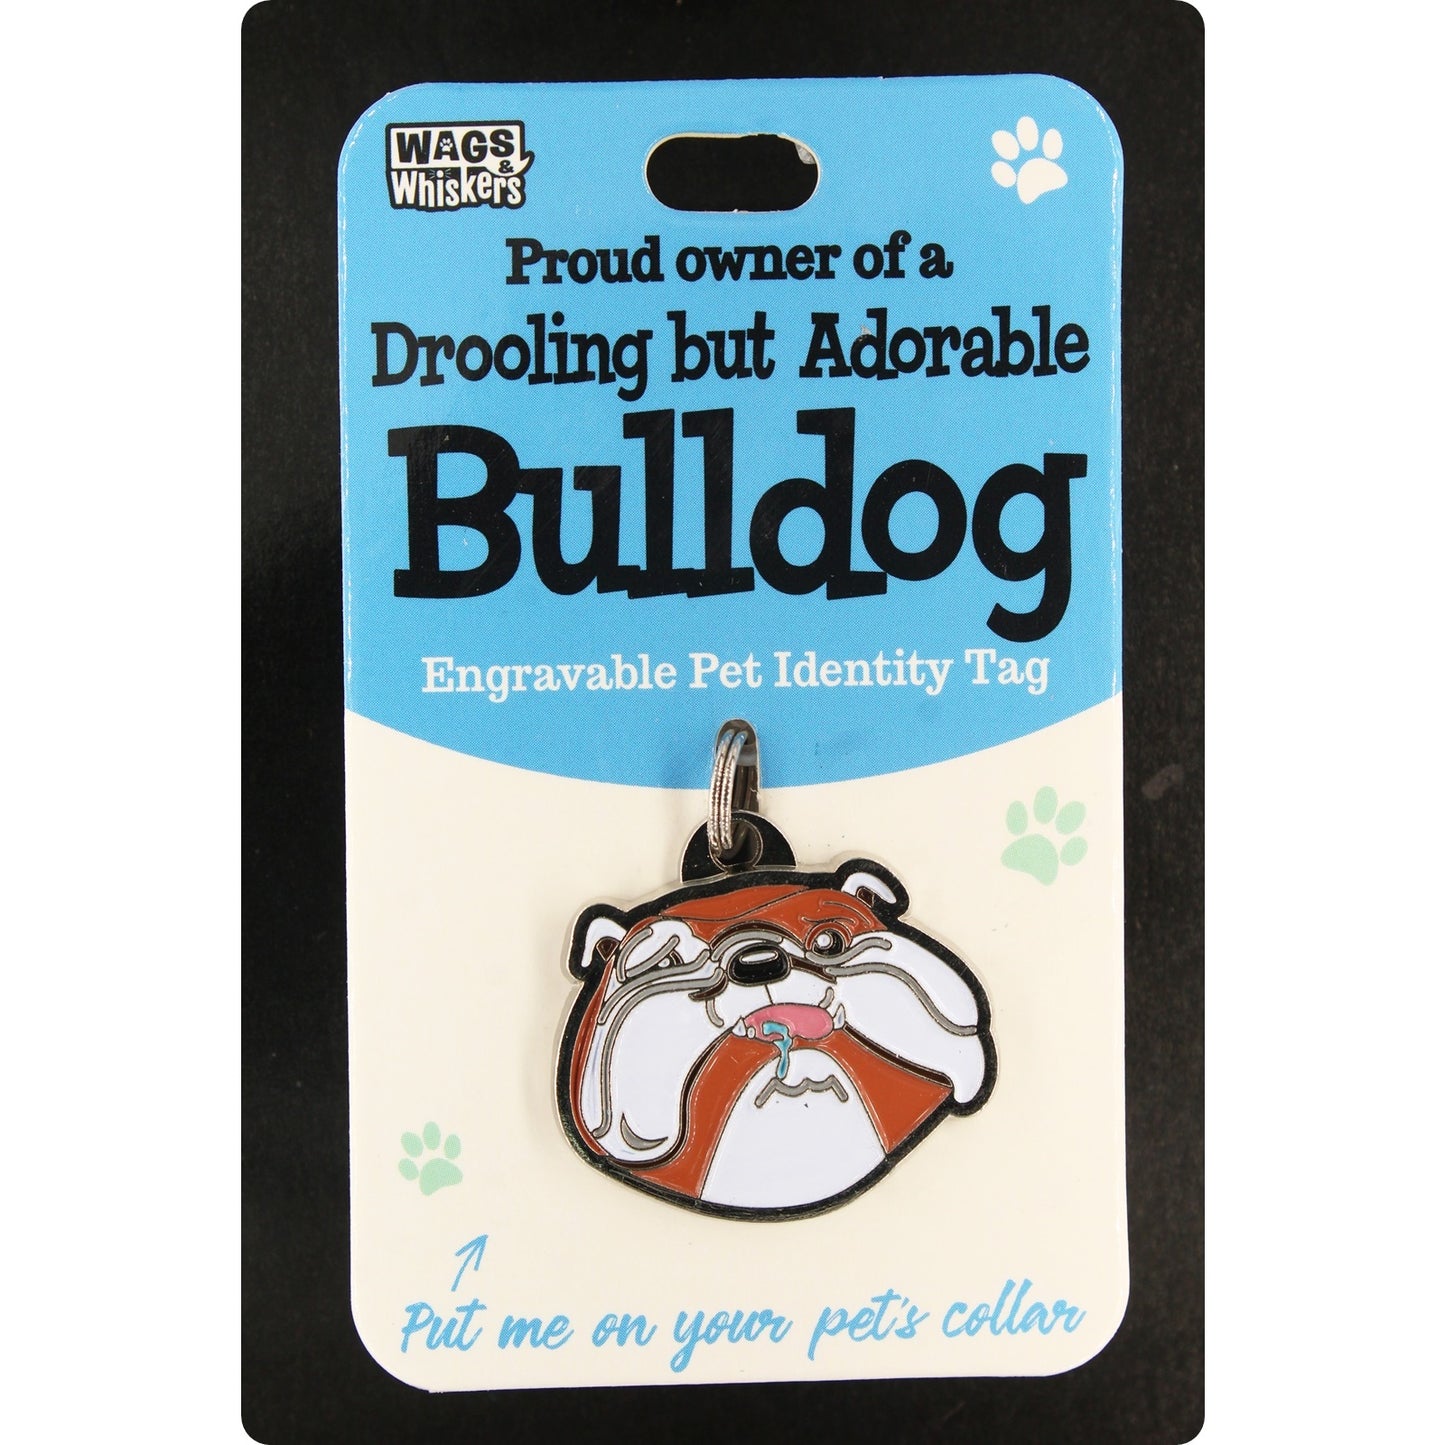 DESIRABLE GIFTS BULLDOG WAGS & WHISKERS DOG PET TAG I CAN NOT ENGRAVE THIS ITEM